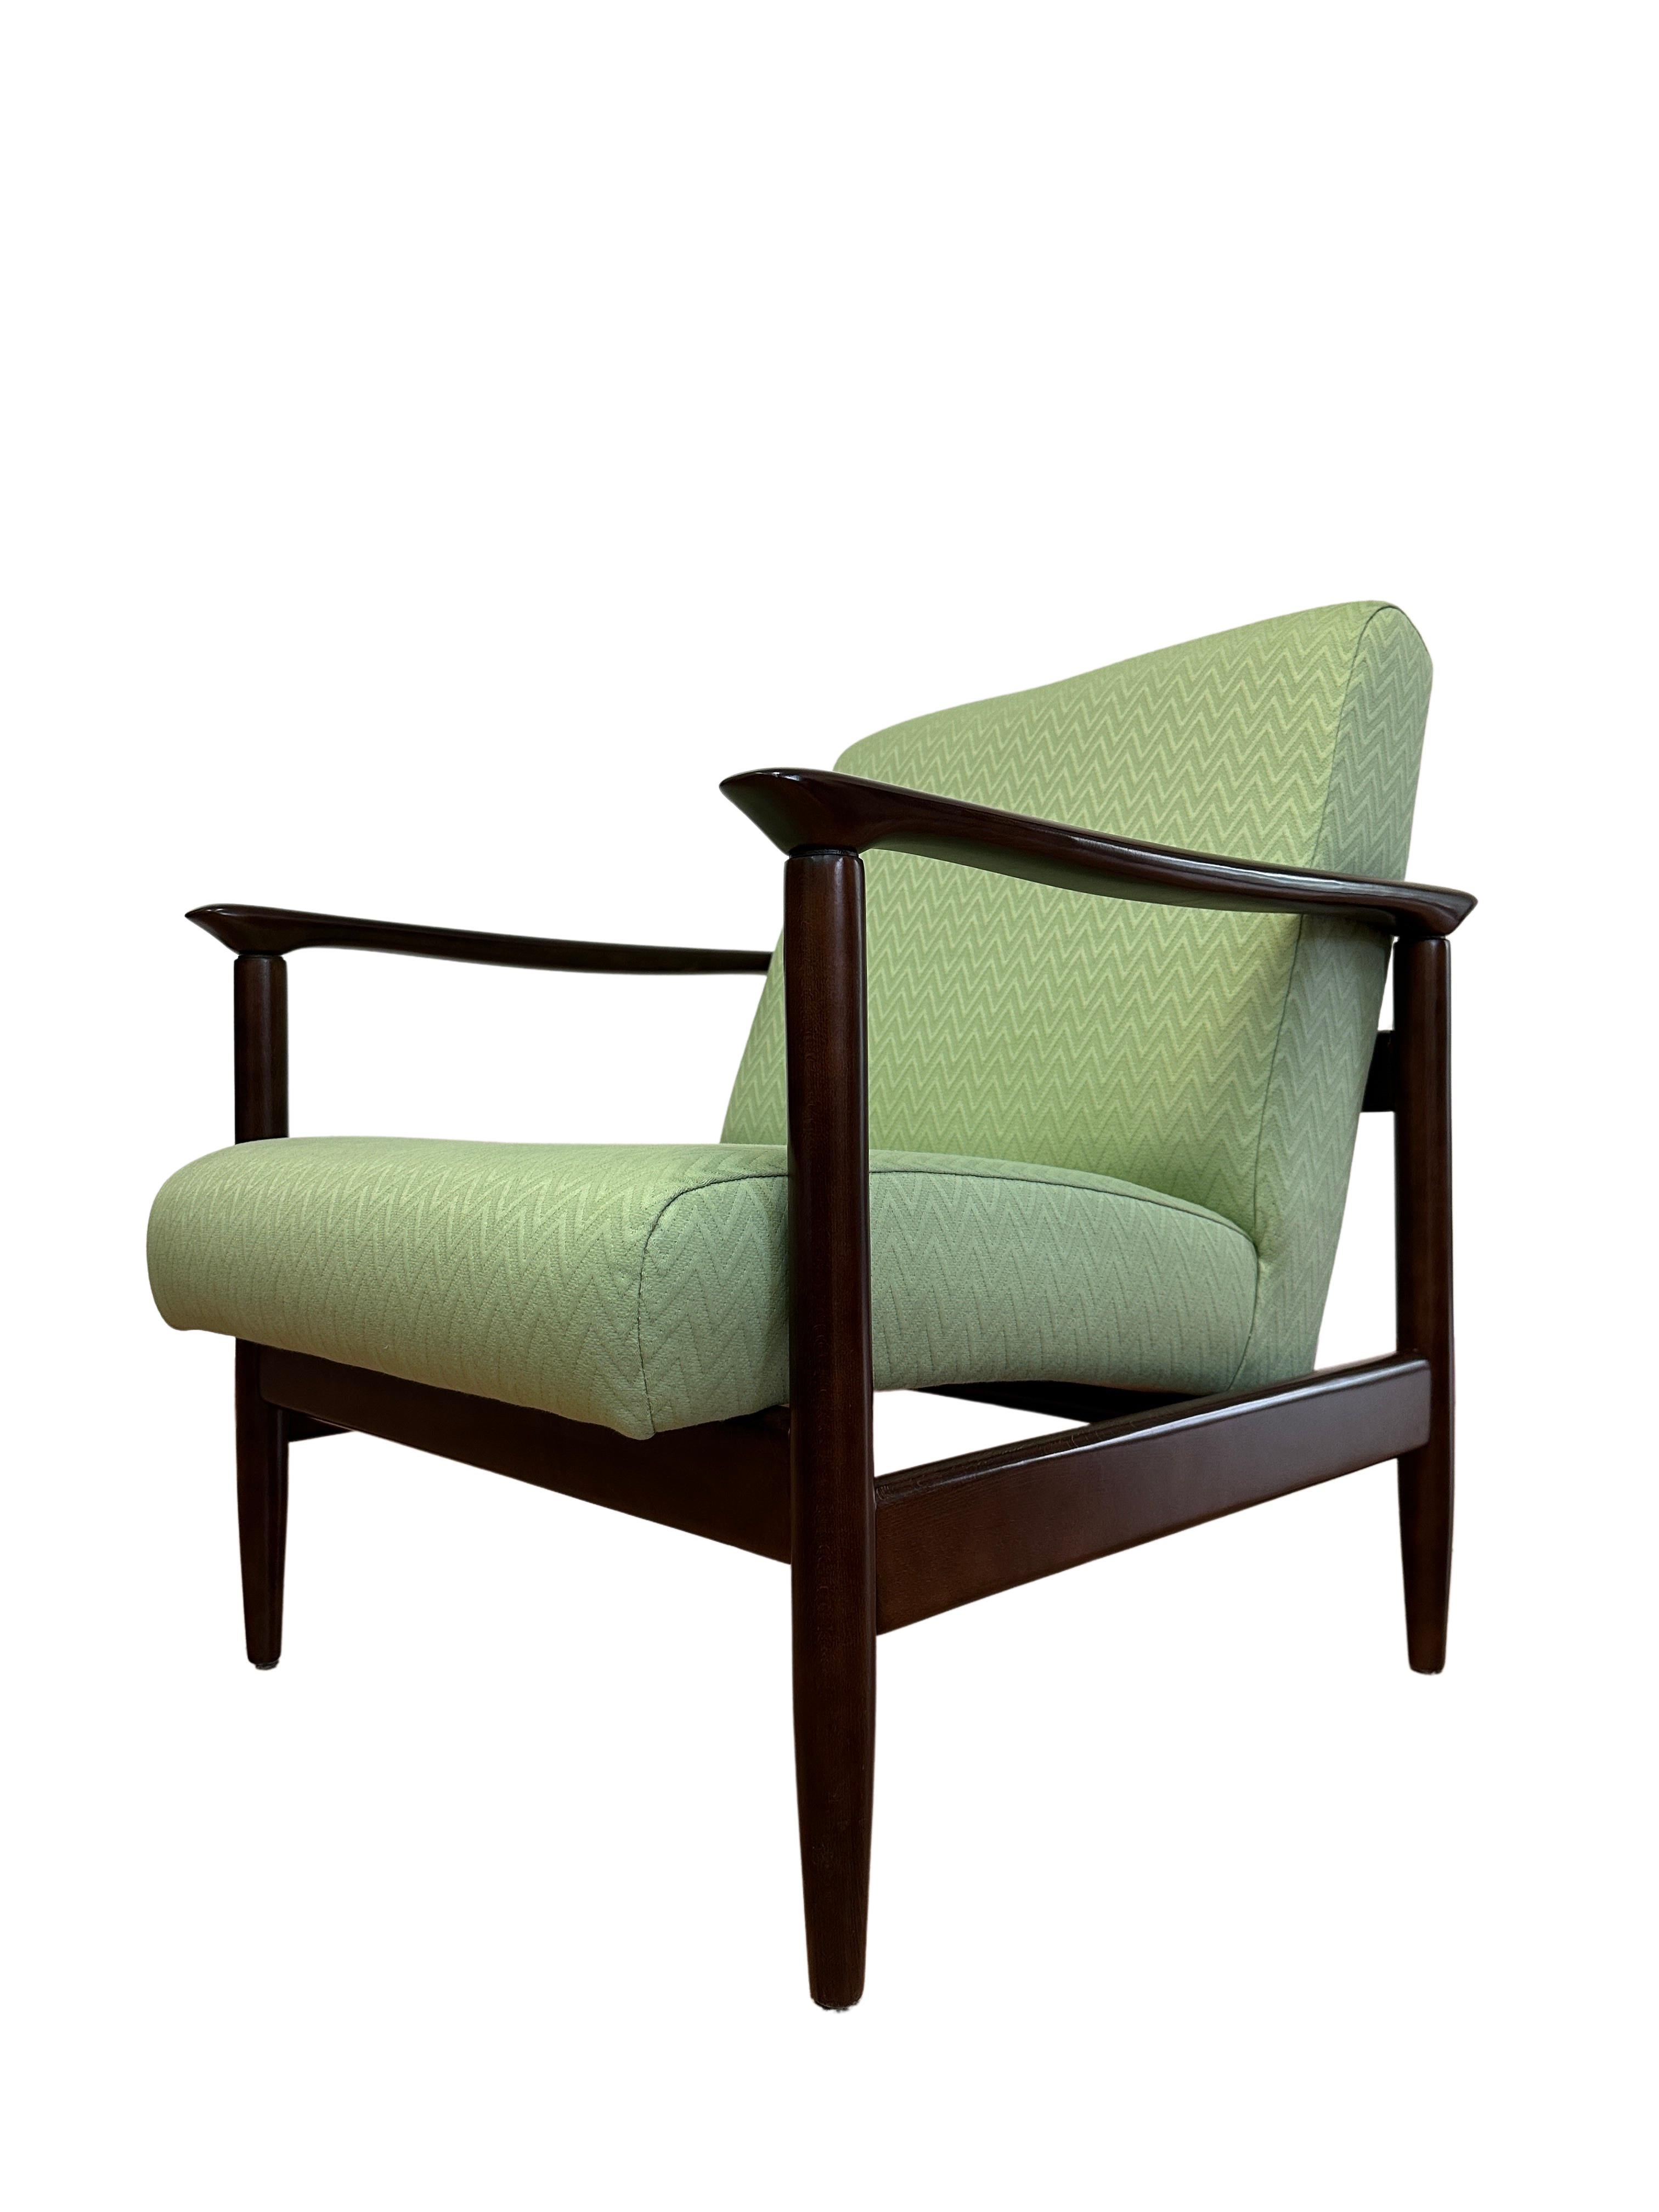 One of the icon of Polish mid-century design, an armchair, designed by Edmund Homa - Polish architect, industrial and interior design designer, professor at the Academy of Fine Arts in Gdansk. 
The armchair has been manufactured by Goscicinska